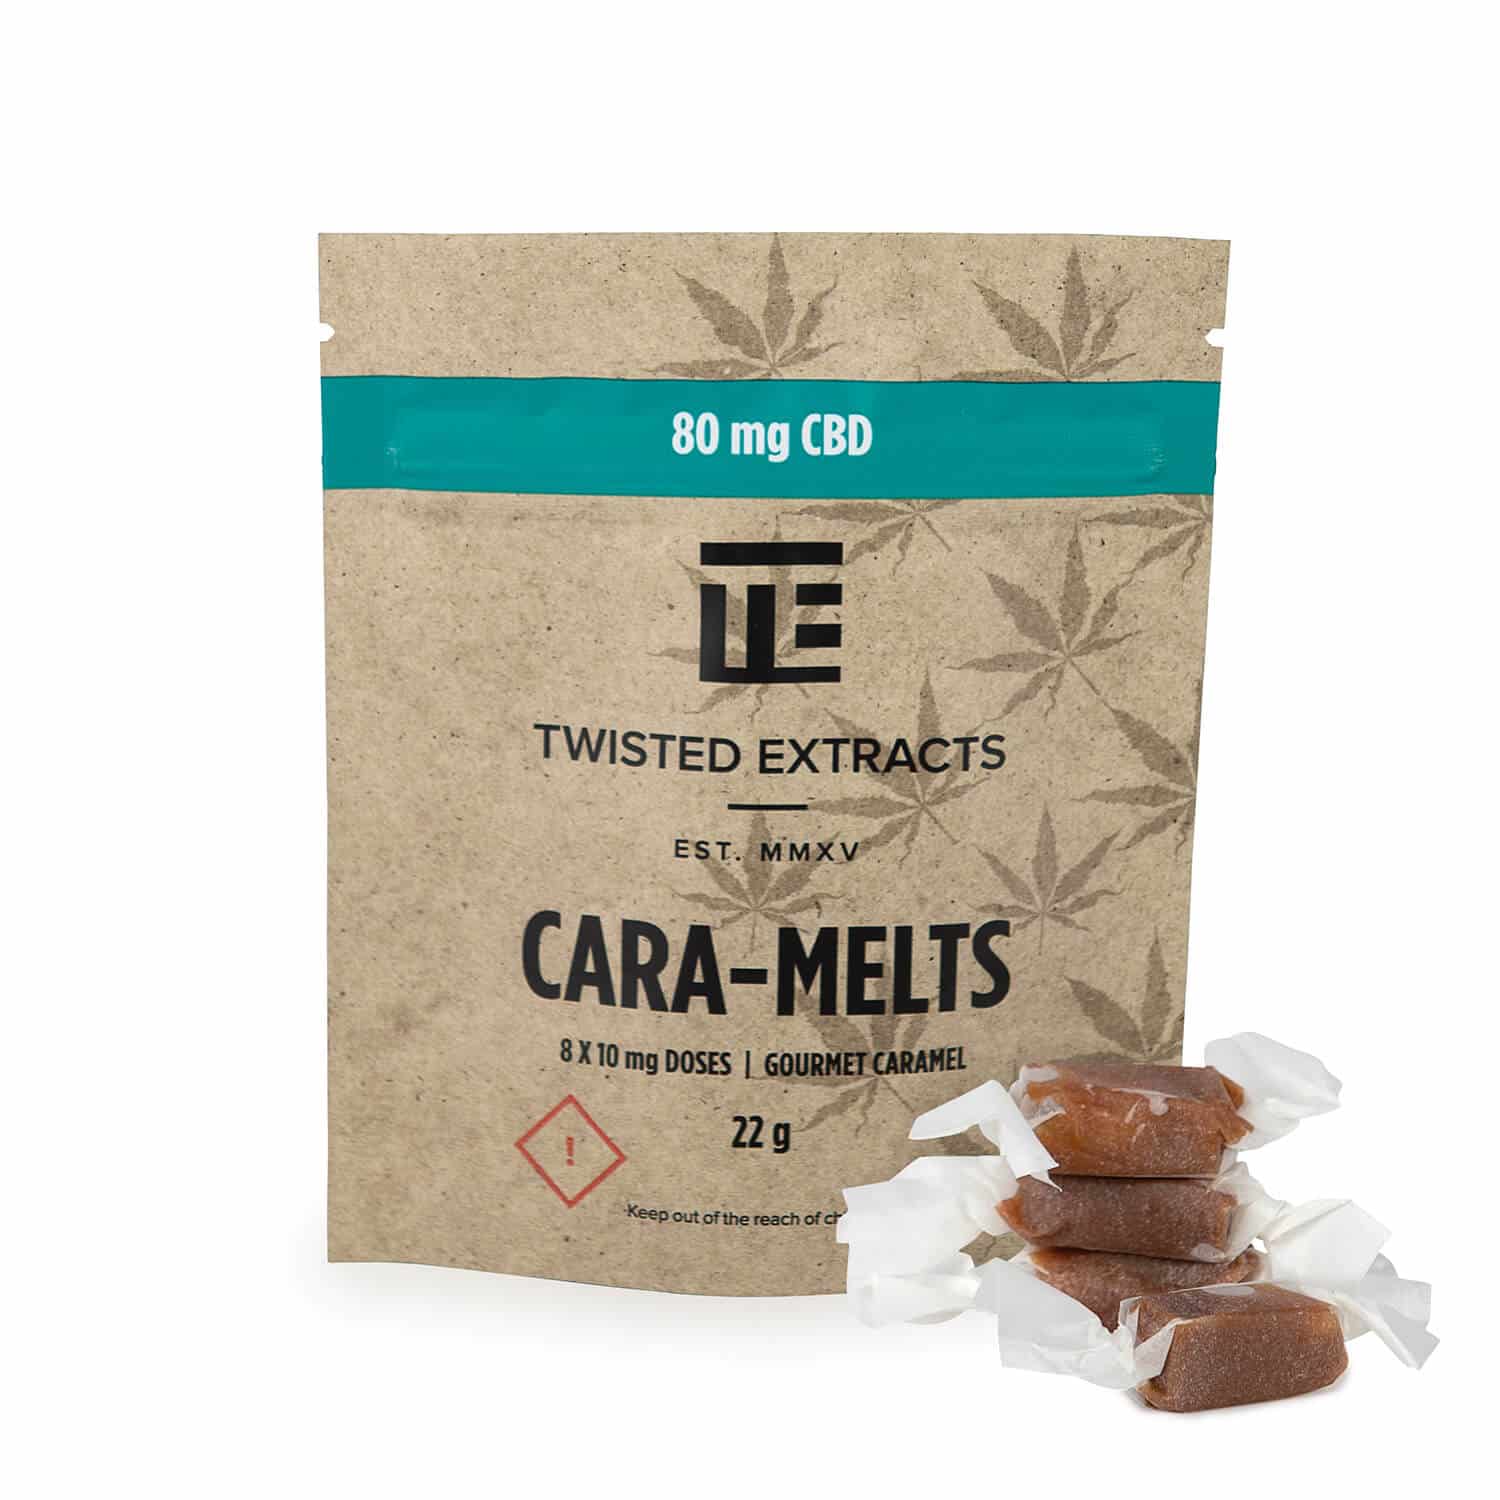 CBD Cara-Melts - Twisted Extracts Image